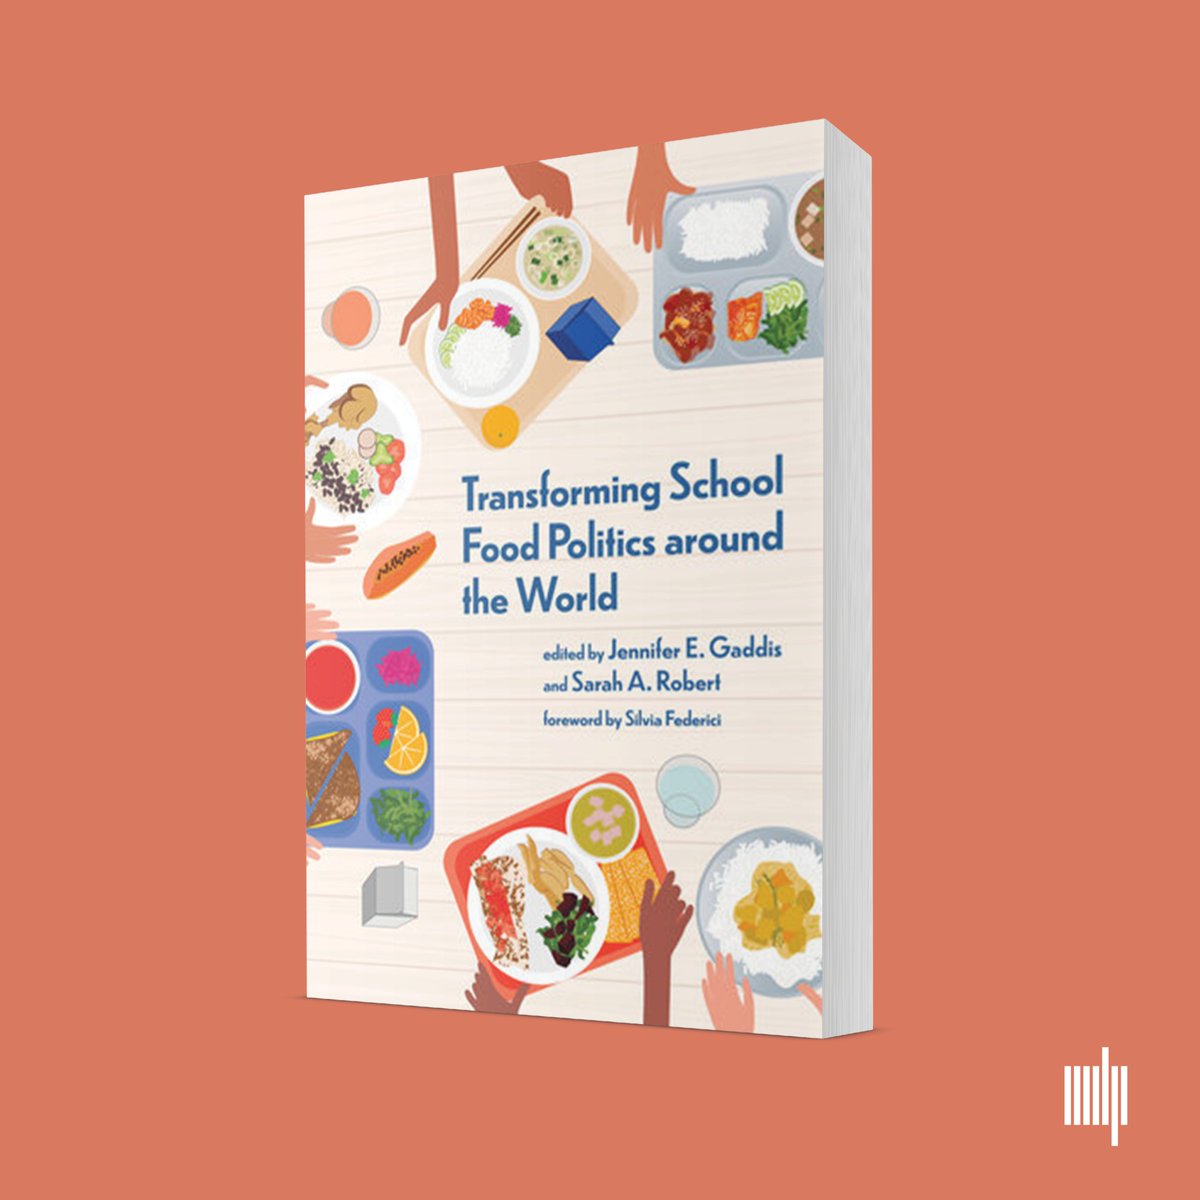 How can we challenge and transform public #schoolfood programs to emphasize care, justice, and sustainability? Find out in my new book with @LearnPolicy from @mitpress, that provides insight from eight countries across the Global North and South. 30% off today only!